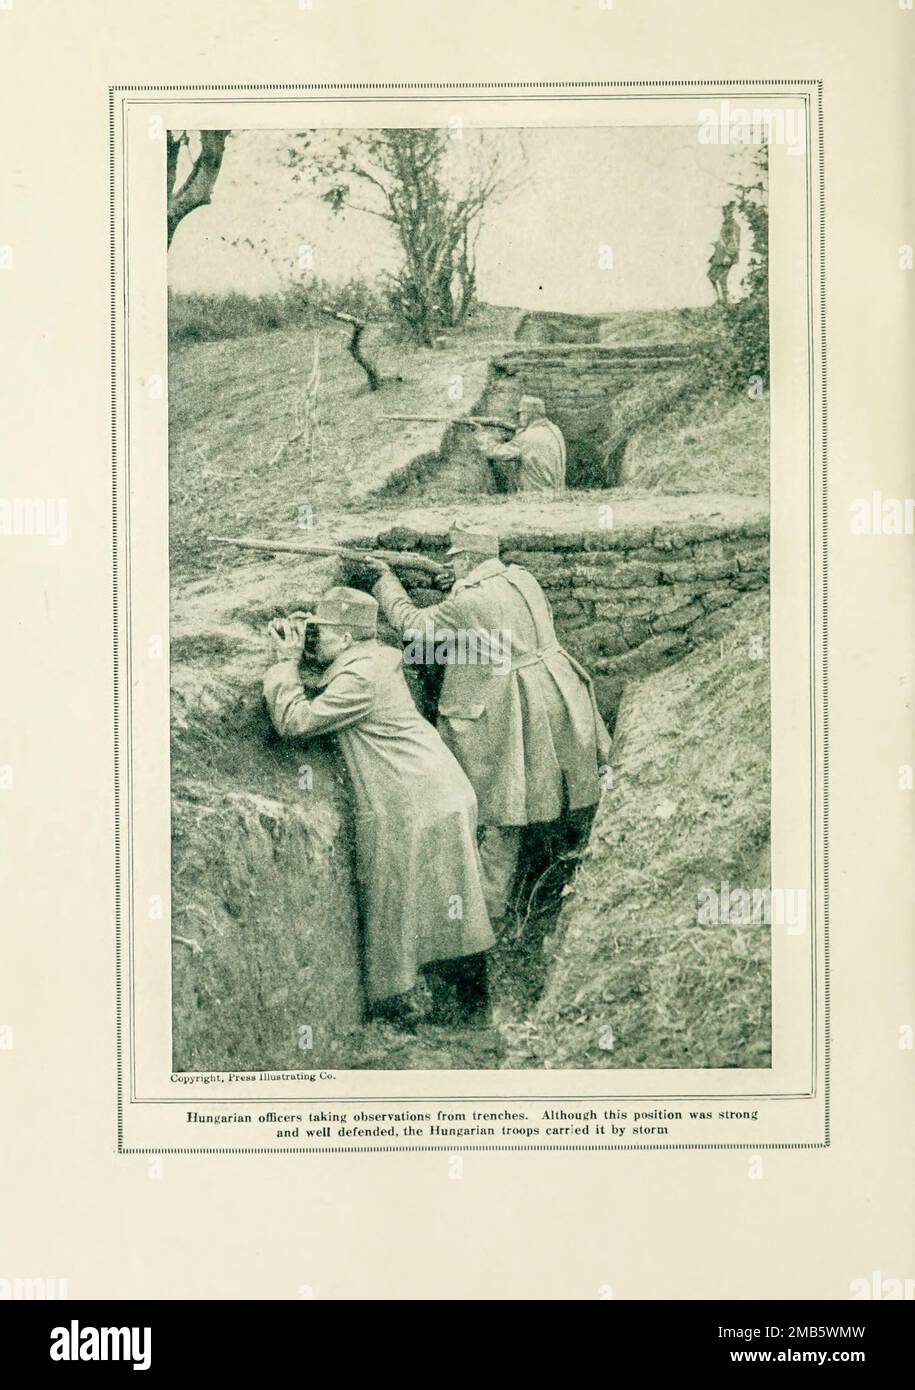 Hungarian Observers in Trenches taken by Storm from the book The story of the great war; the complete historical records of events to date DIPLOMATIC AND STATE PAPERS by Reynolds, Francis Joseph, 1867-1937; Churchill, Allen Leon; Miller, Francis Trevelyan, 1877-1959; Wood, Leonard, 1860-1927; Knight, Austin Melvin, 1854-1927; Palmer, Frederick, 1873-1958; Simonds, Frank Herbert, 1878-; Ruhl, Arthur Brown, 1876-  Volume VIII Published 1920 Stock Photo